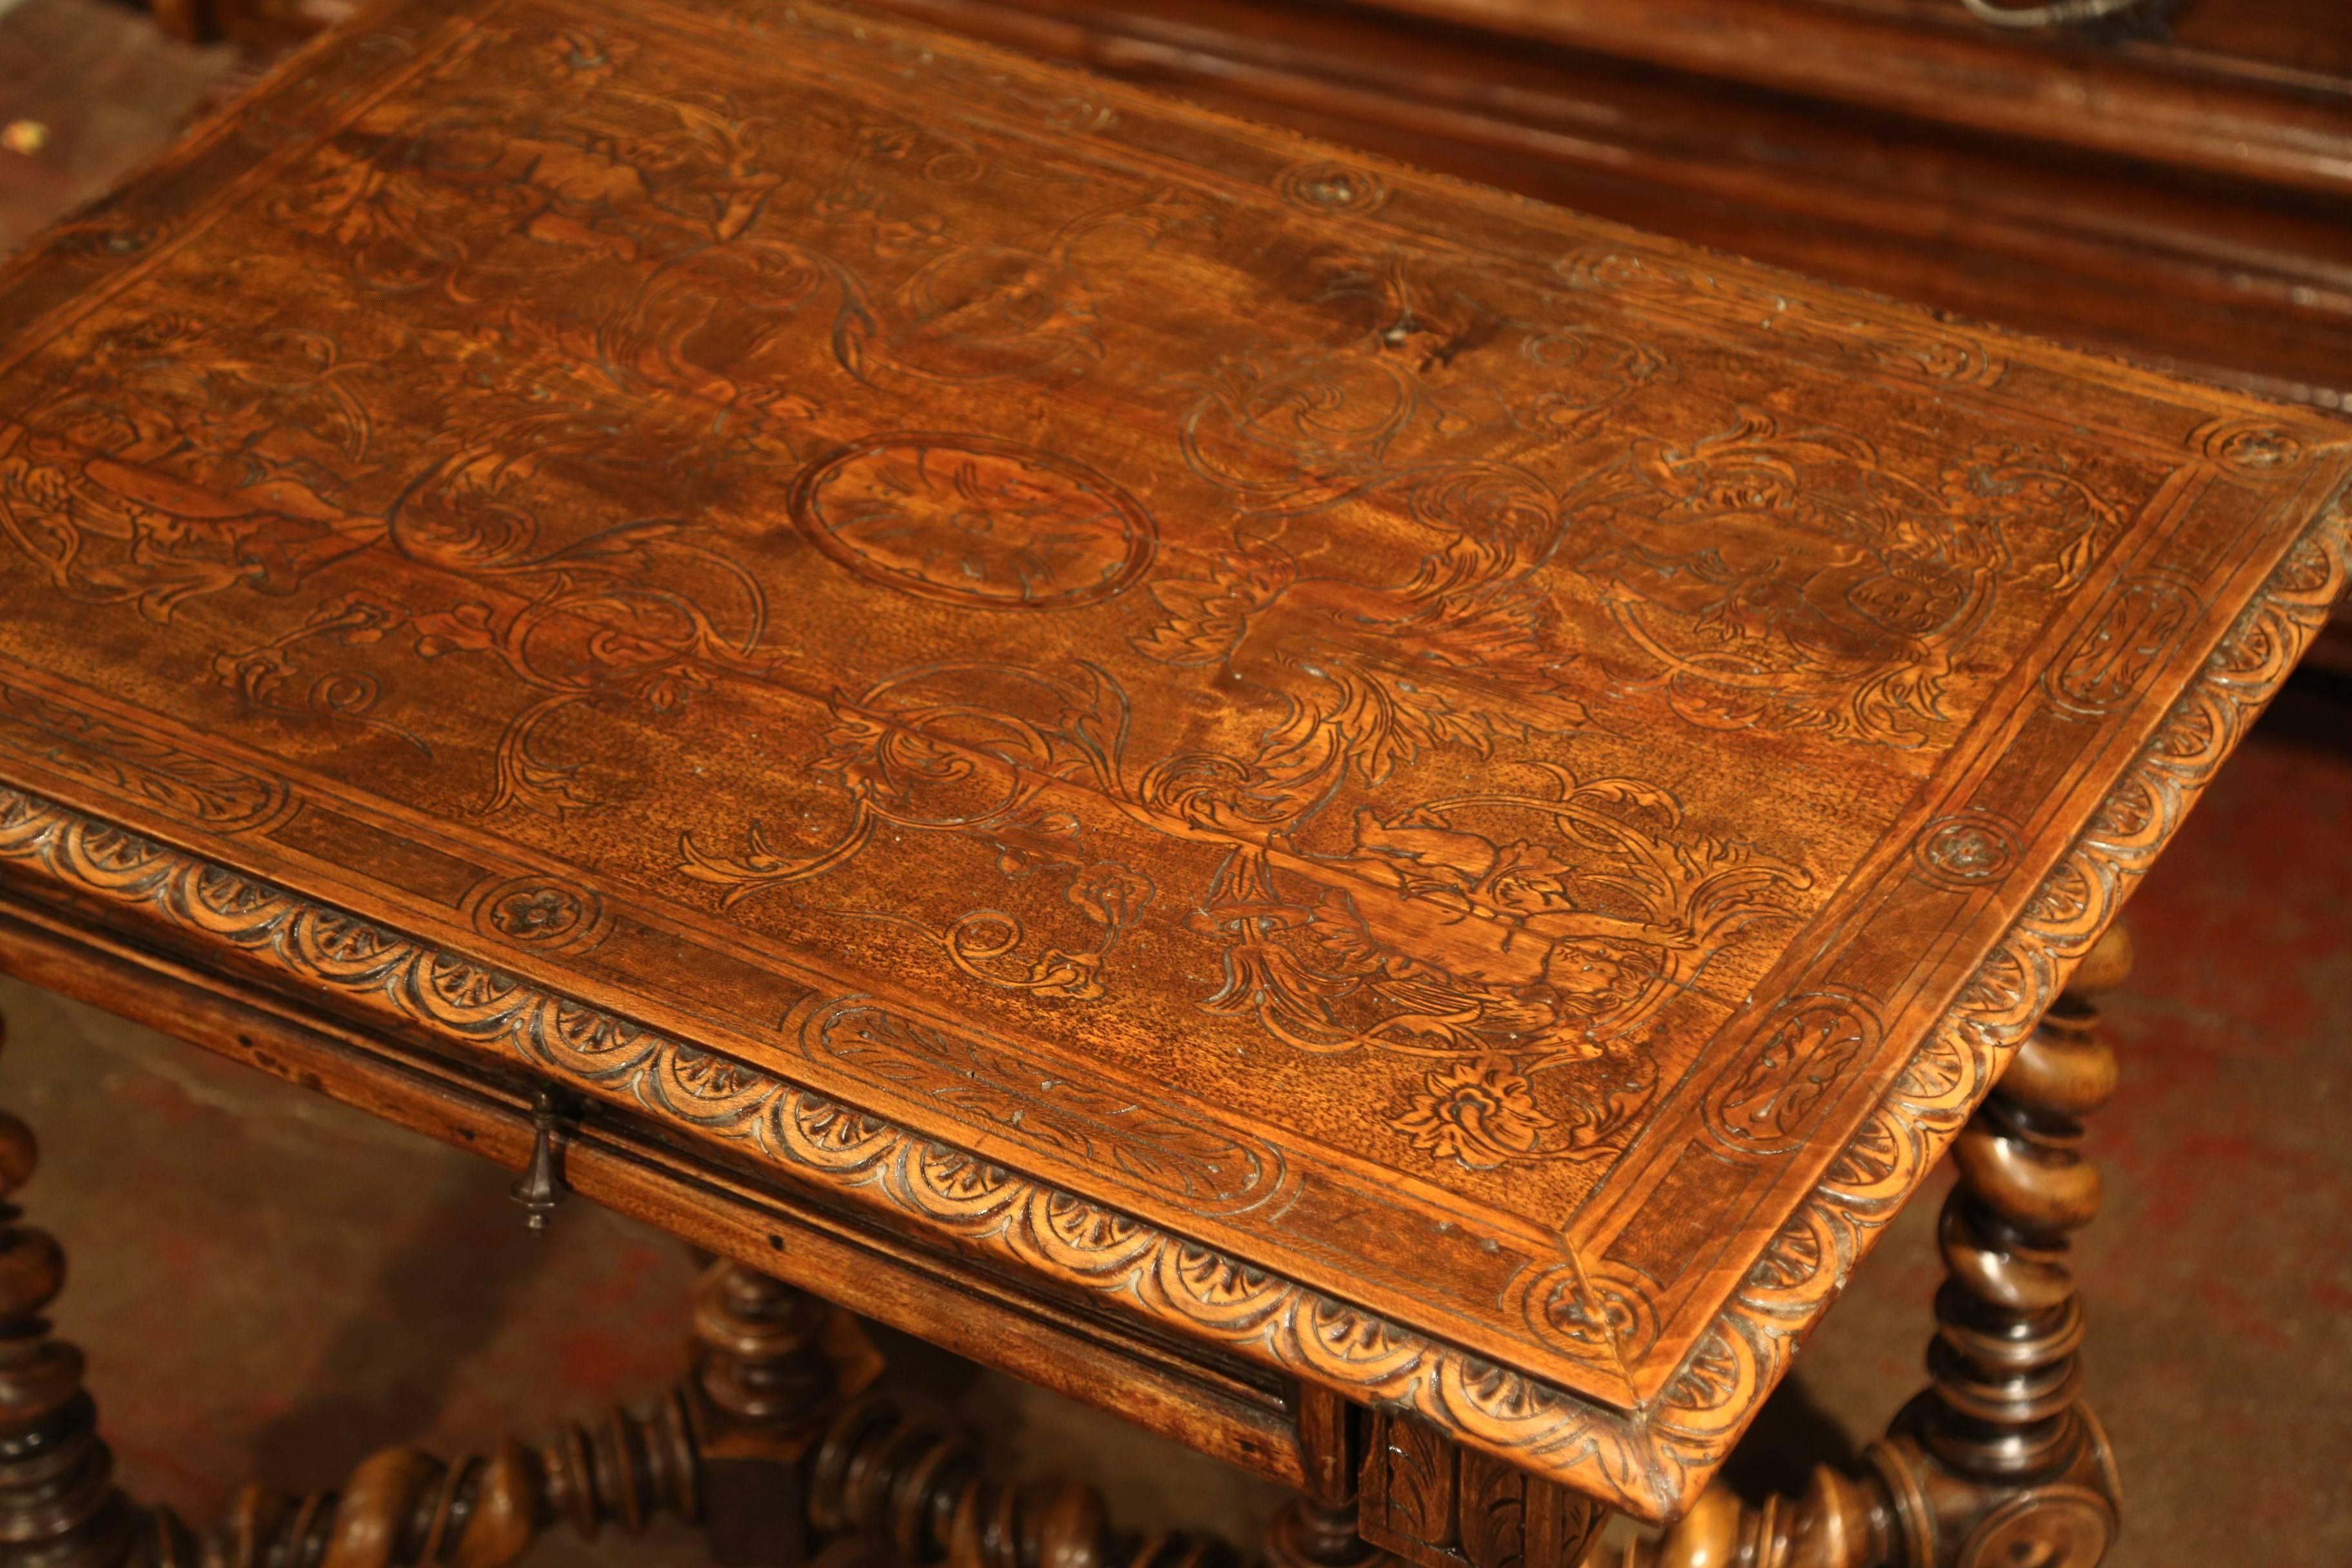 Patinated 19th Century French Louis XIII Carved Walnut Table Desk with Barley Twist Legs